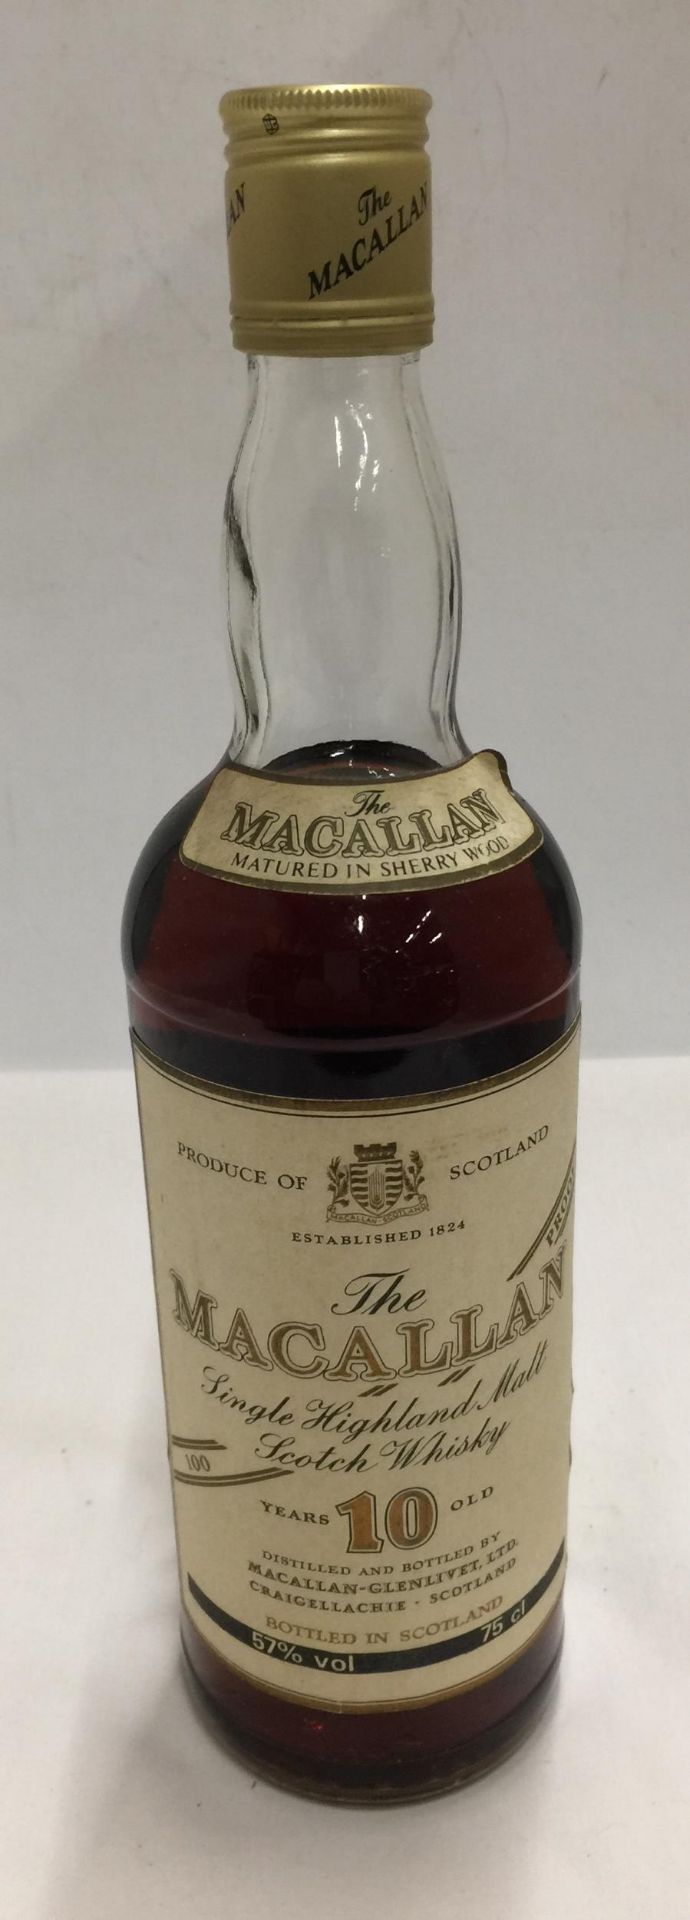 A 75CL BOTTLE - MACALLAN 10 YEARS OLD SINGLE HIGHLAND MALT SCOTCH WHISKY, 100 PROOF, 57% VOLUME